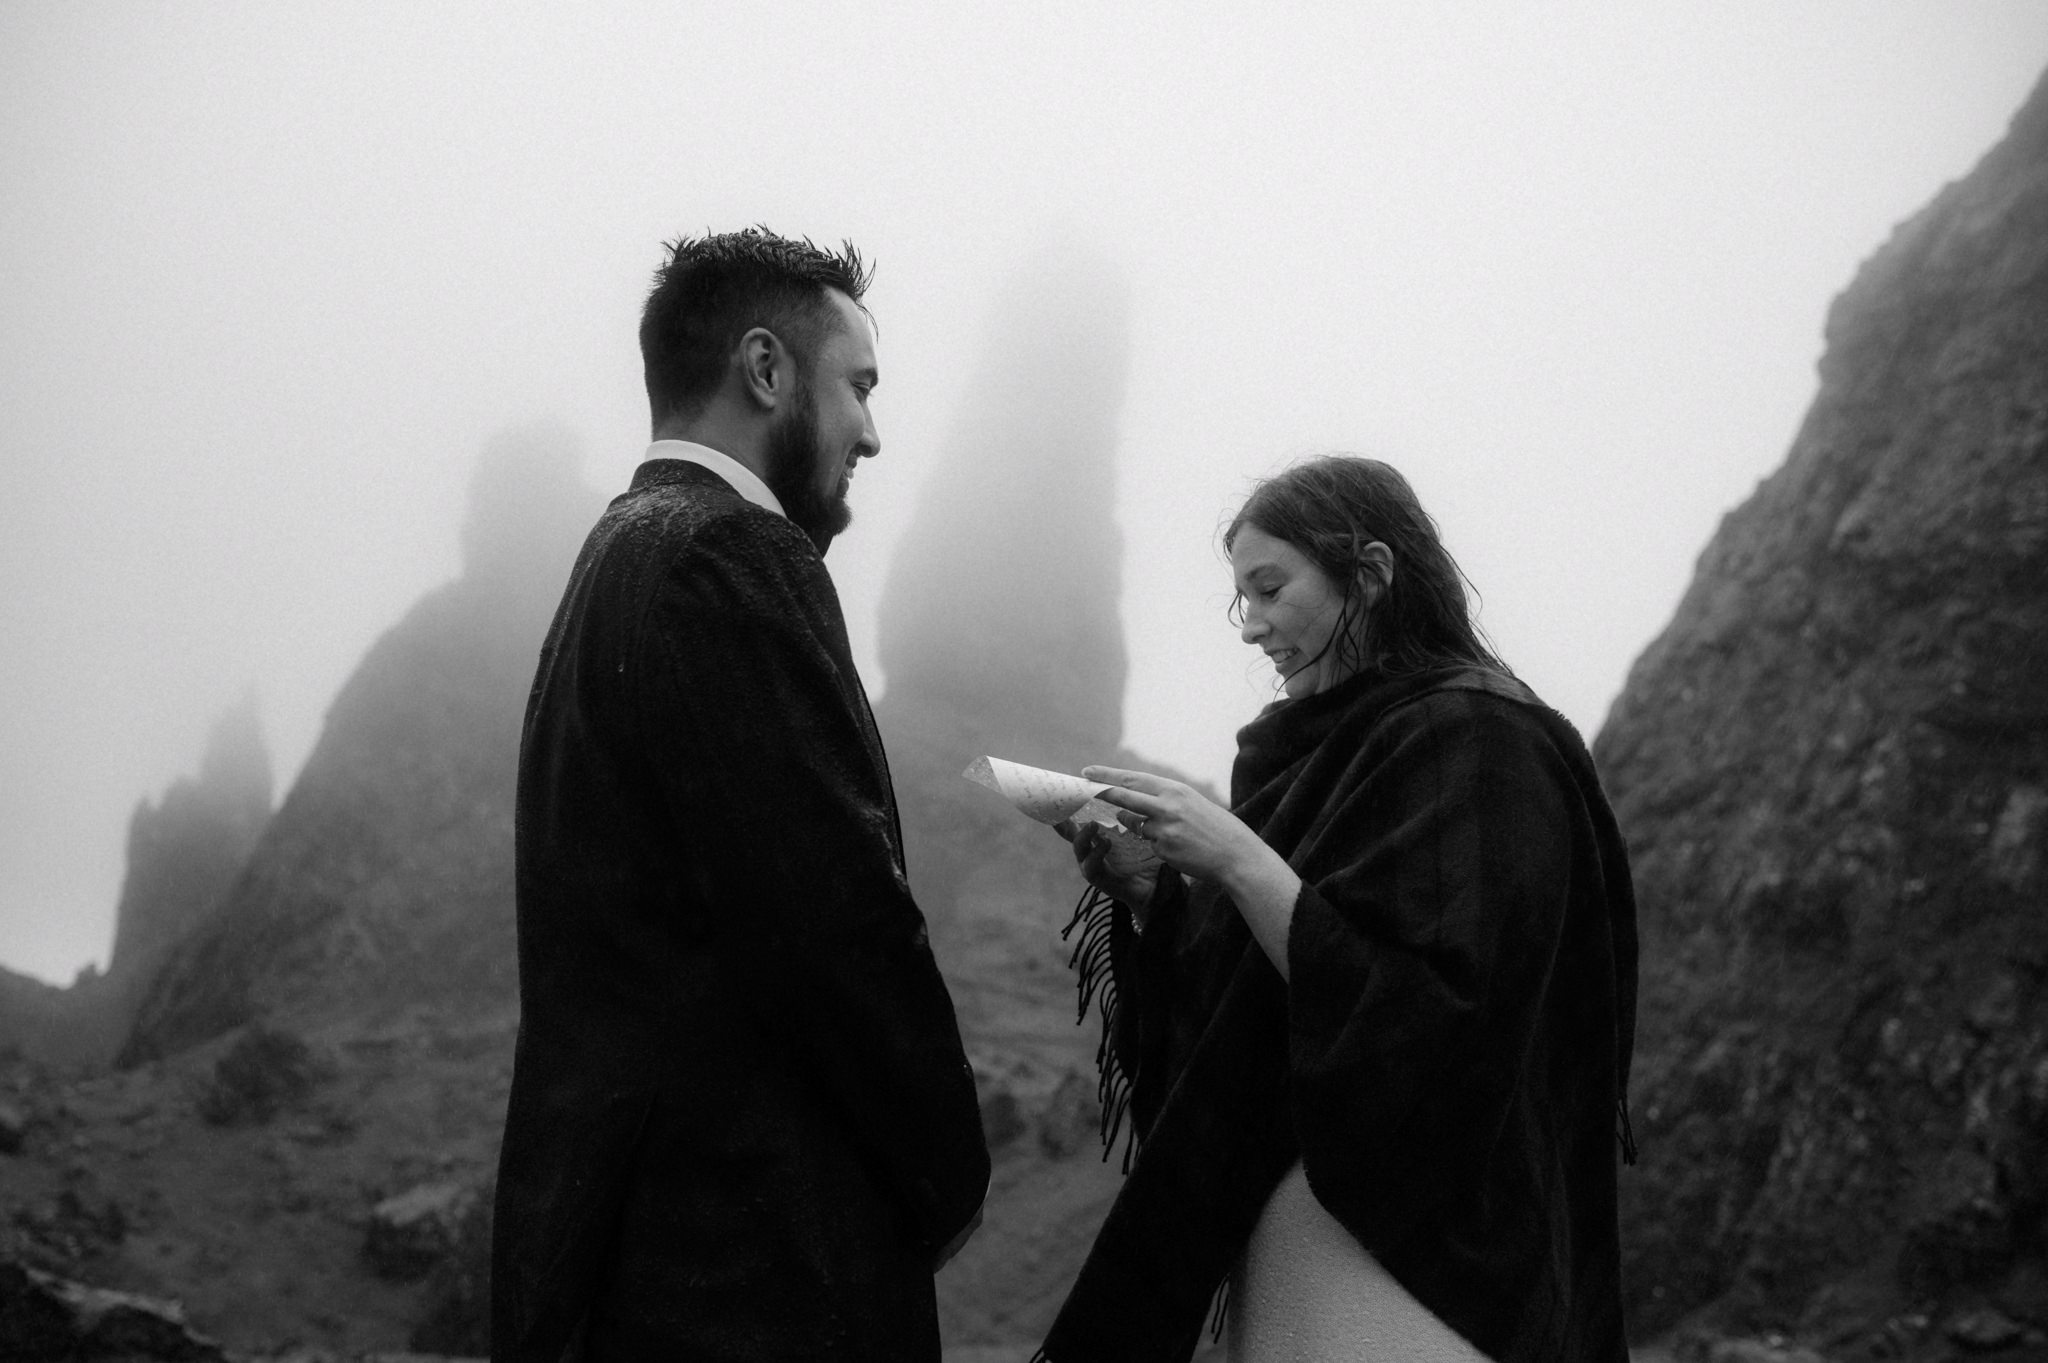 A wedding taking place in Scotland outdoors in the rain with Bride and groom reading vows near the Old man of Storr on Skye